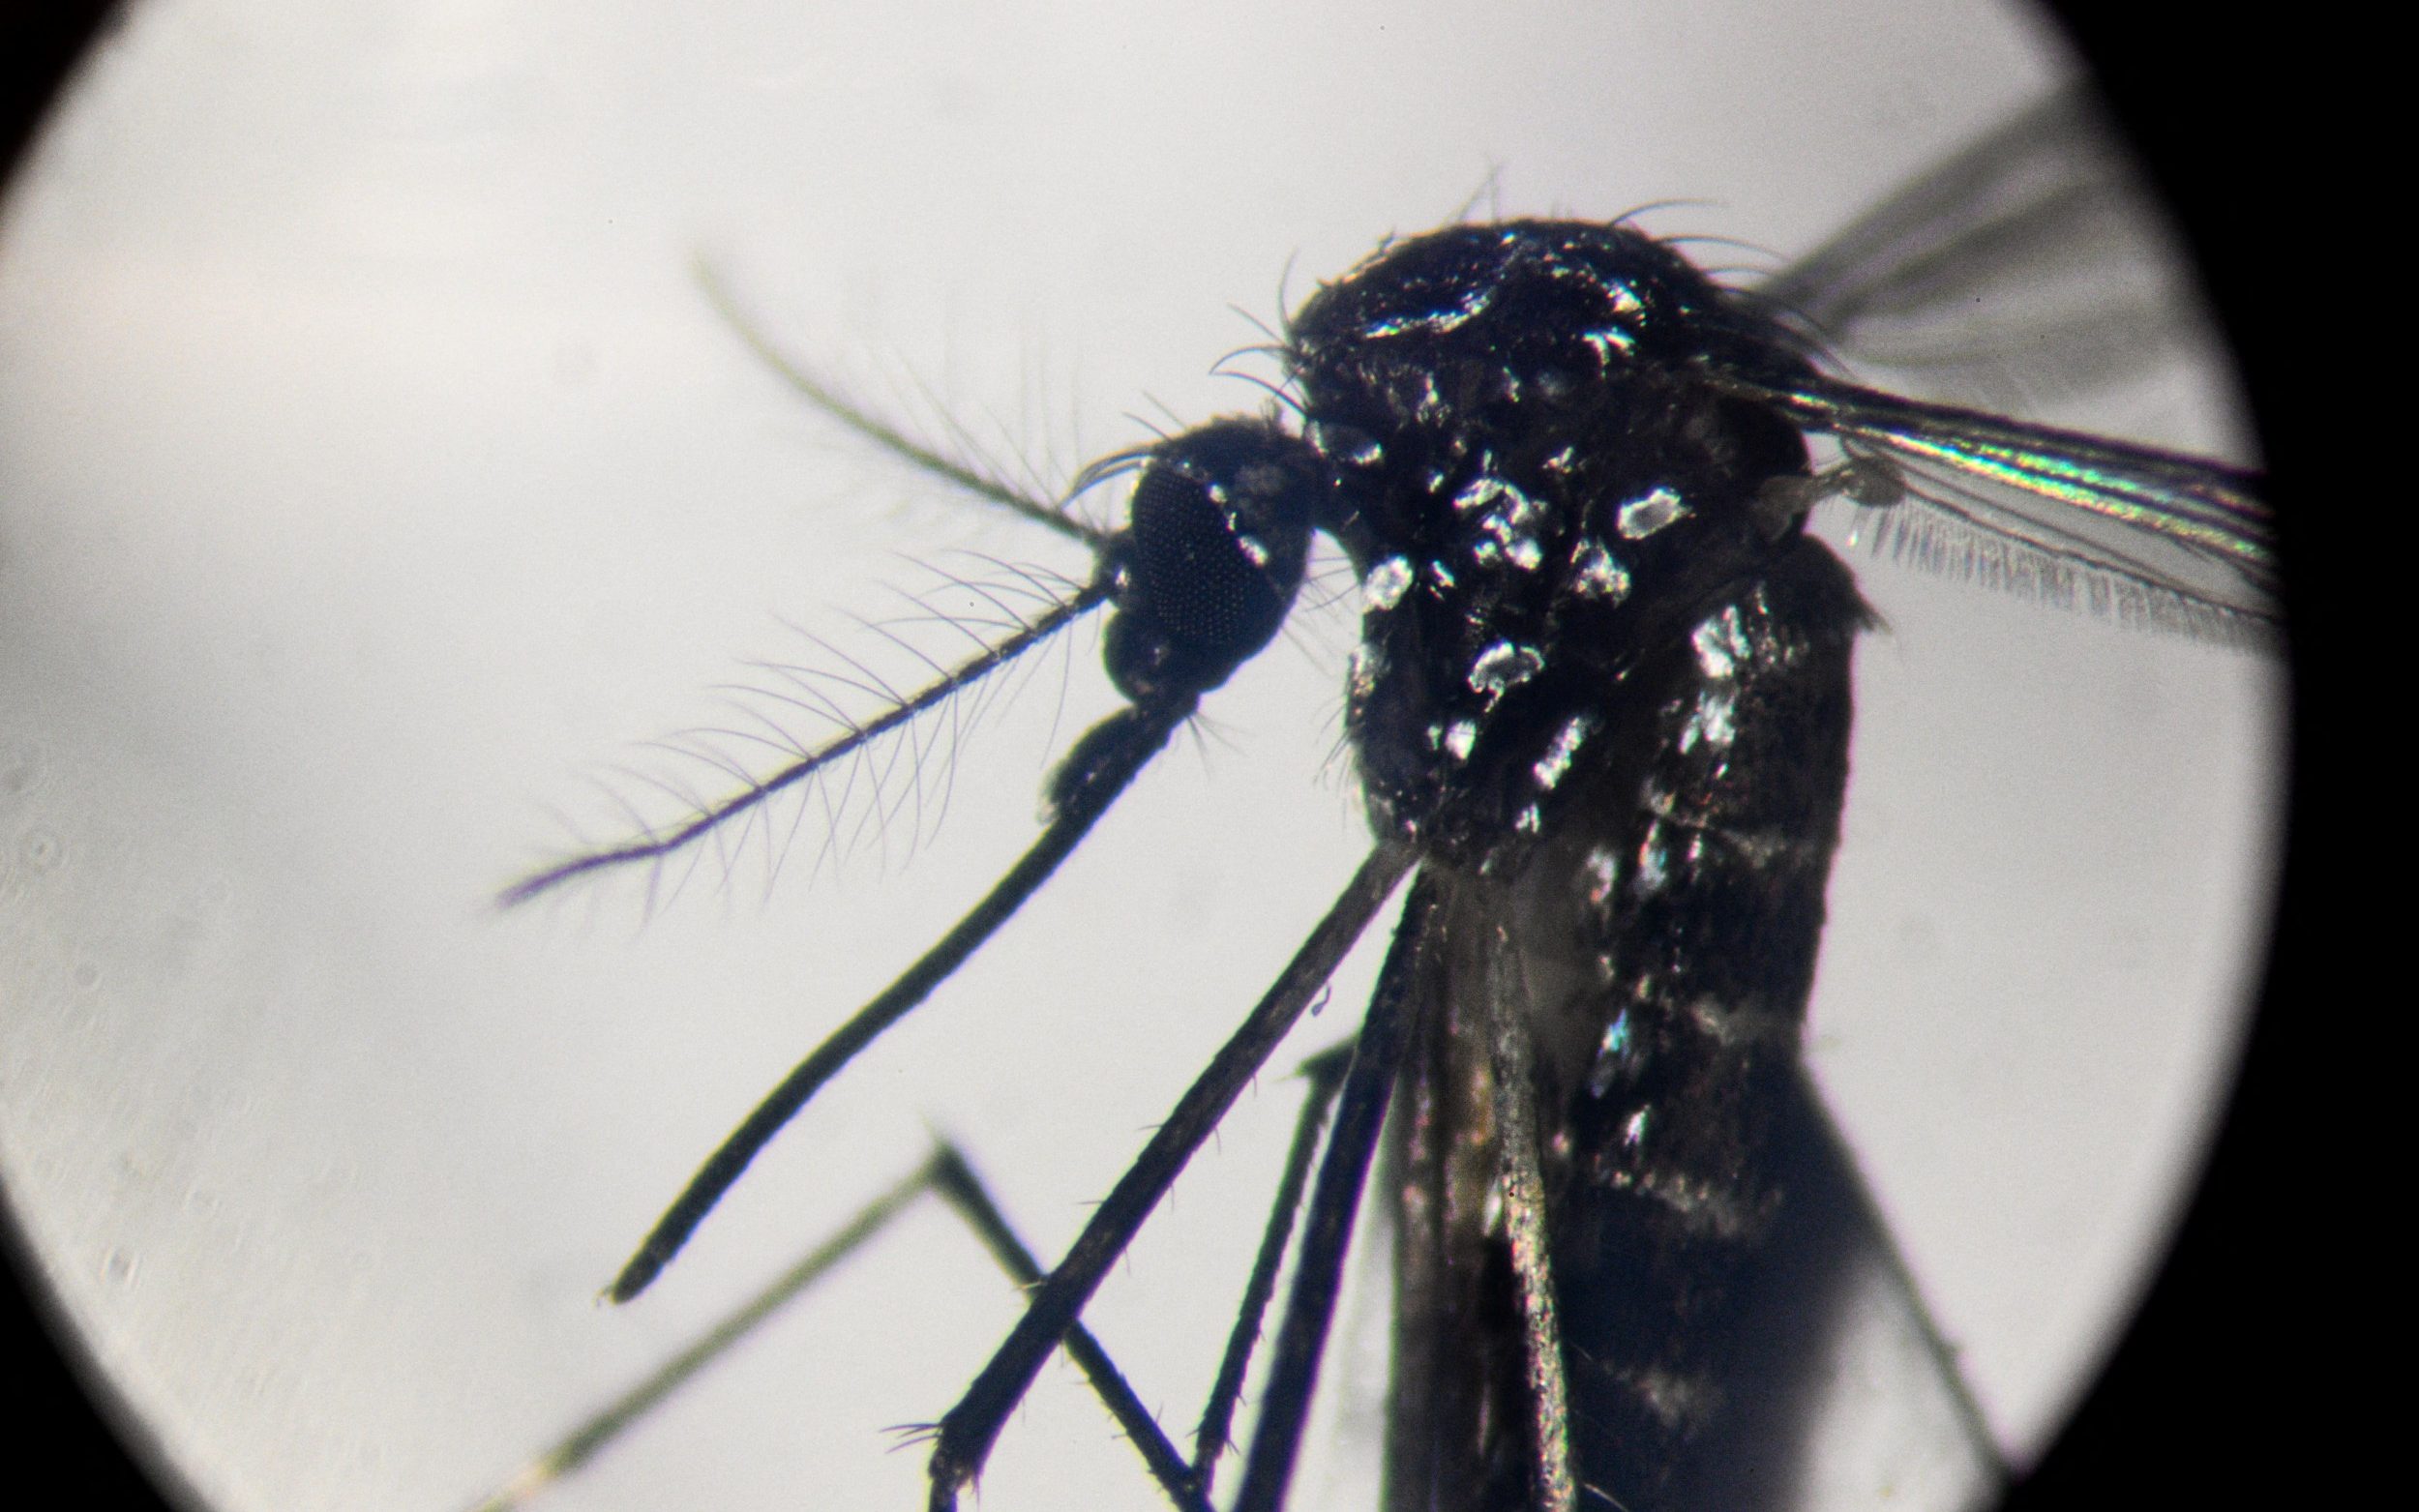 americas dengue outbreak is the ‘worst to date’